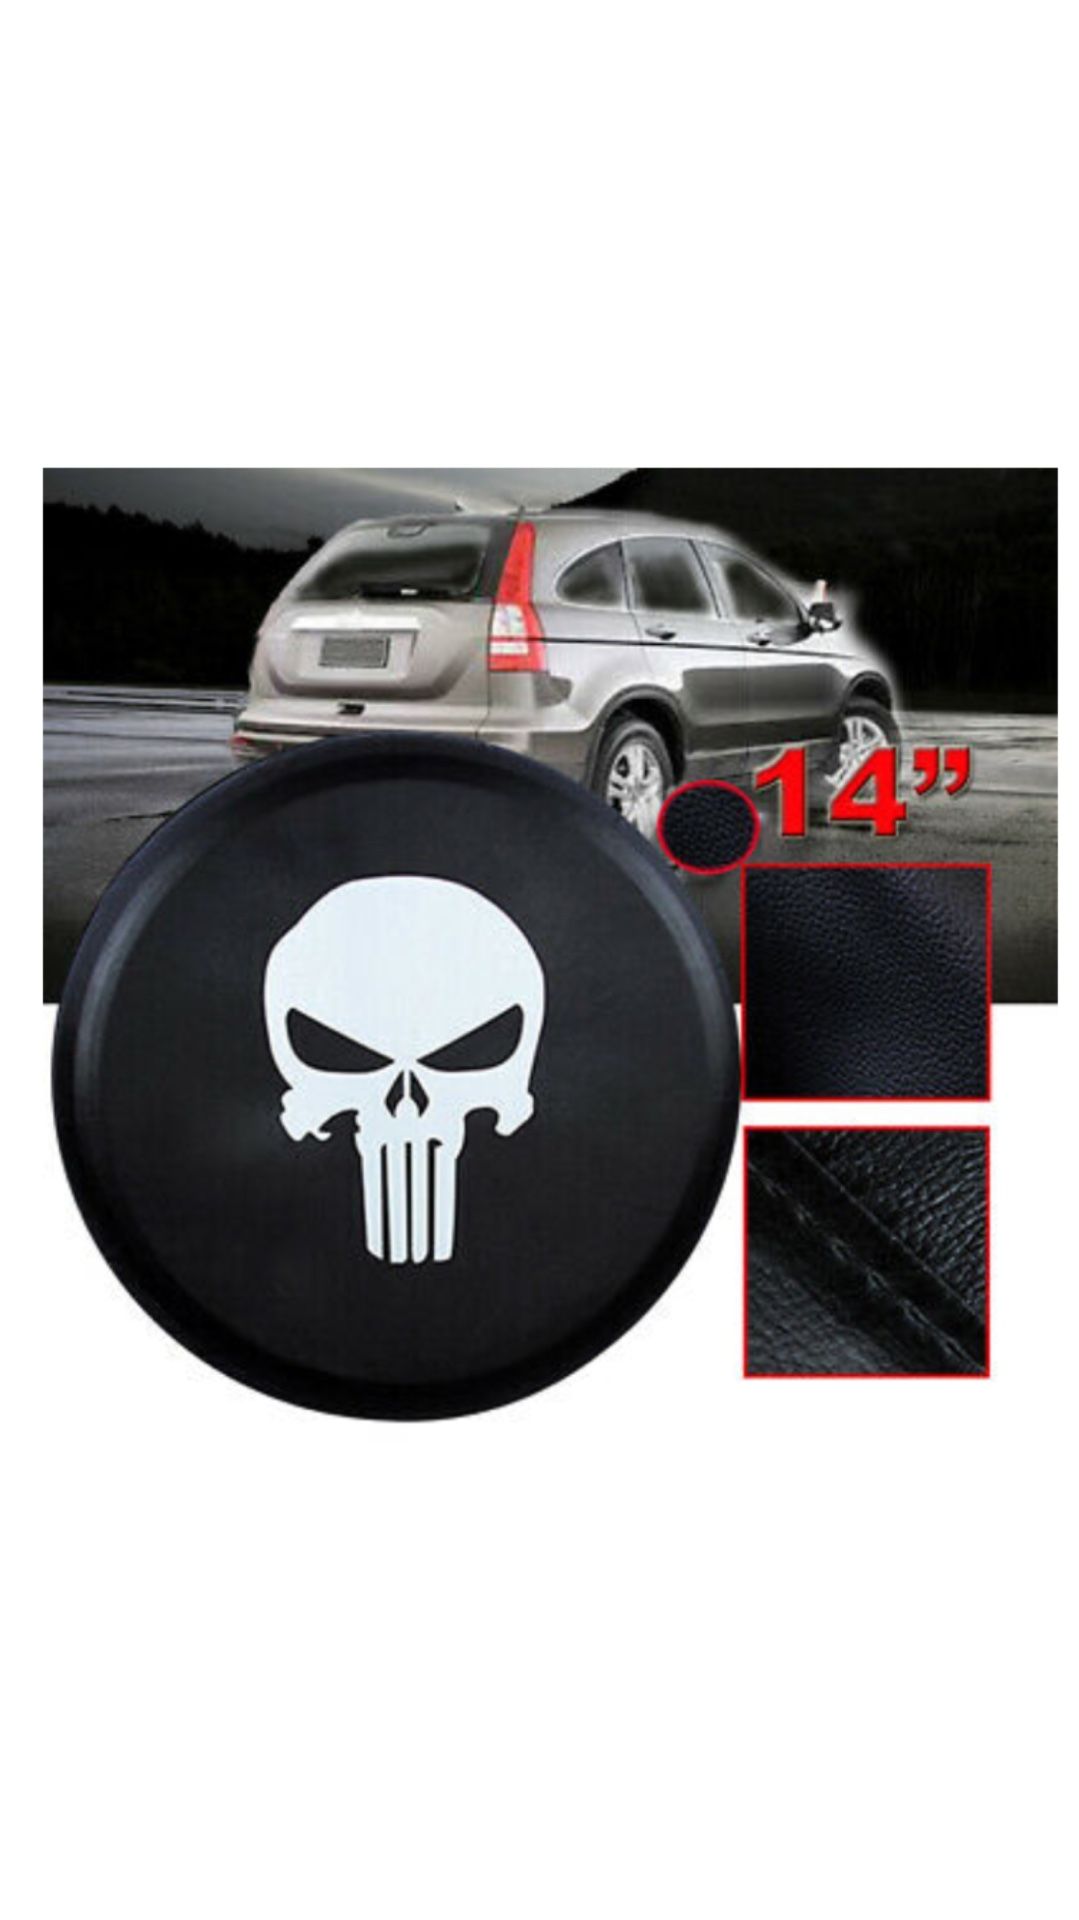 Punisher leather rear wheel spare tire cover 14” new van suv truck Jeep